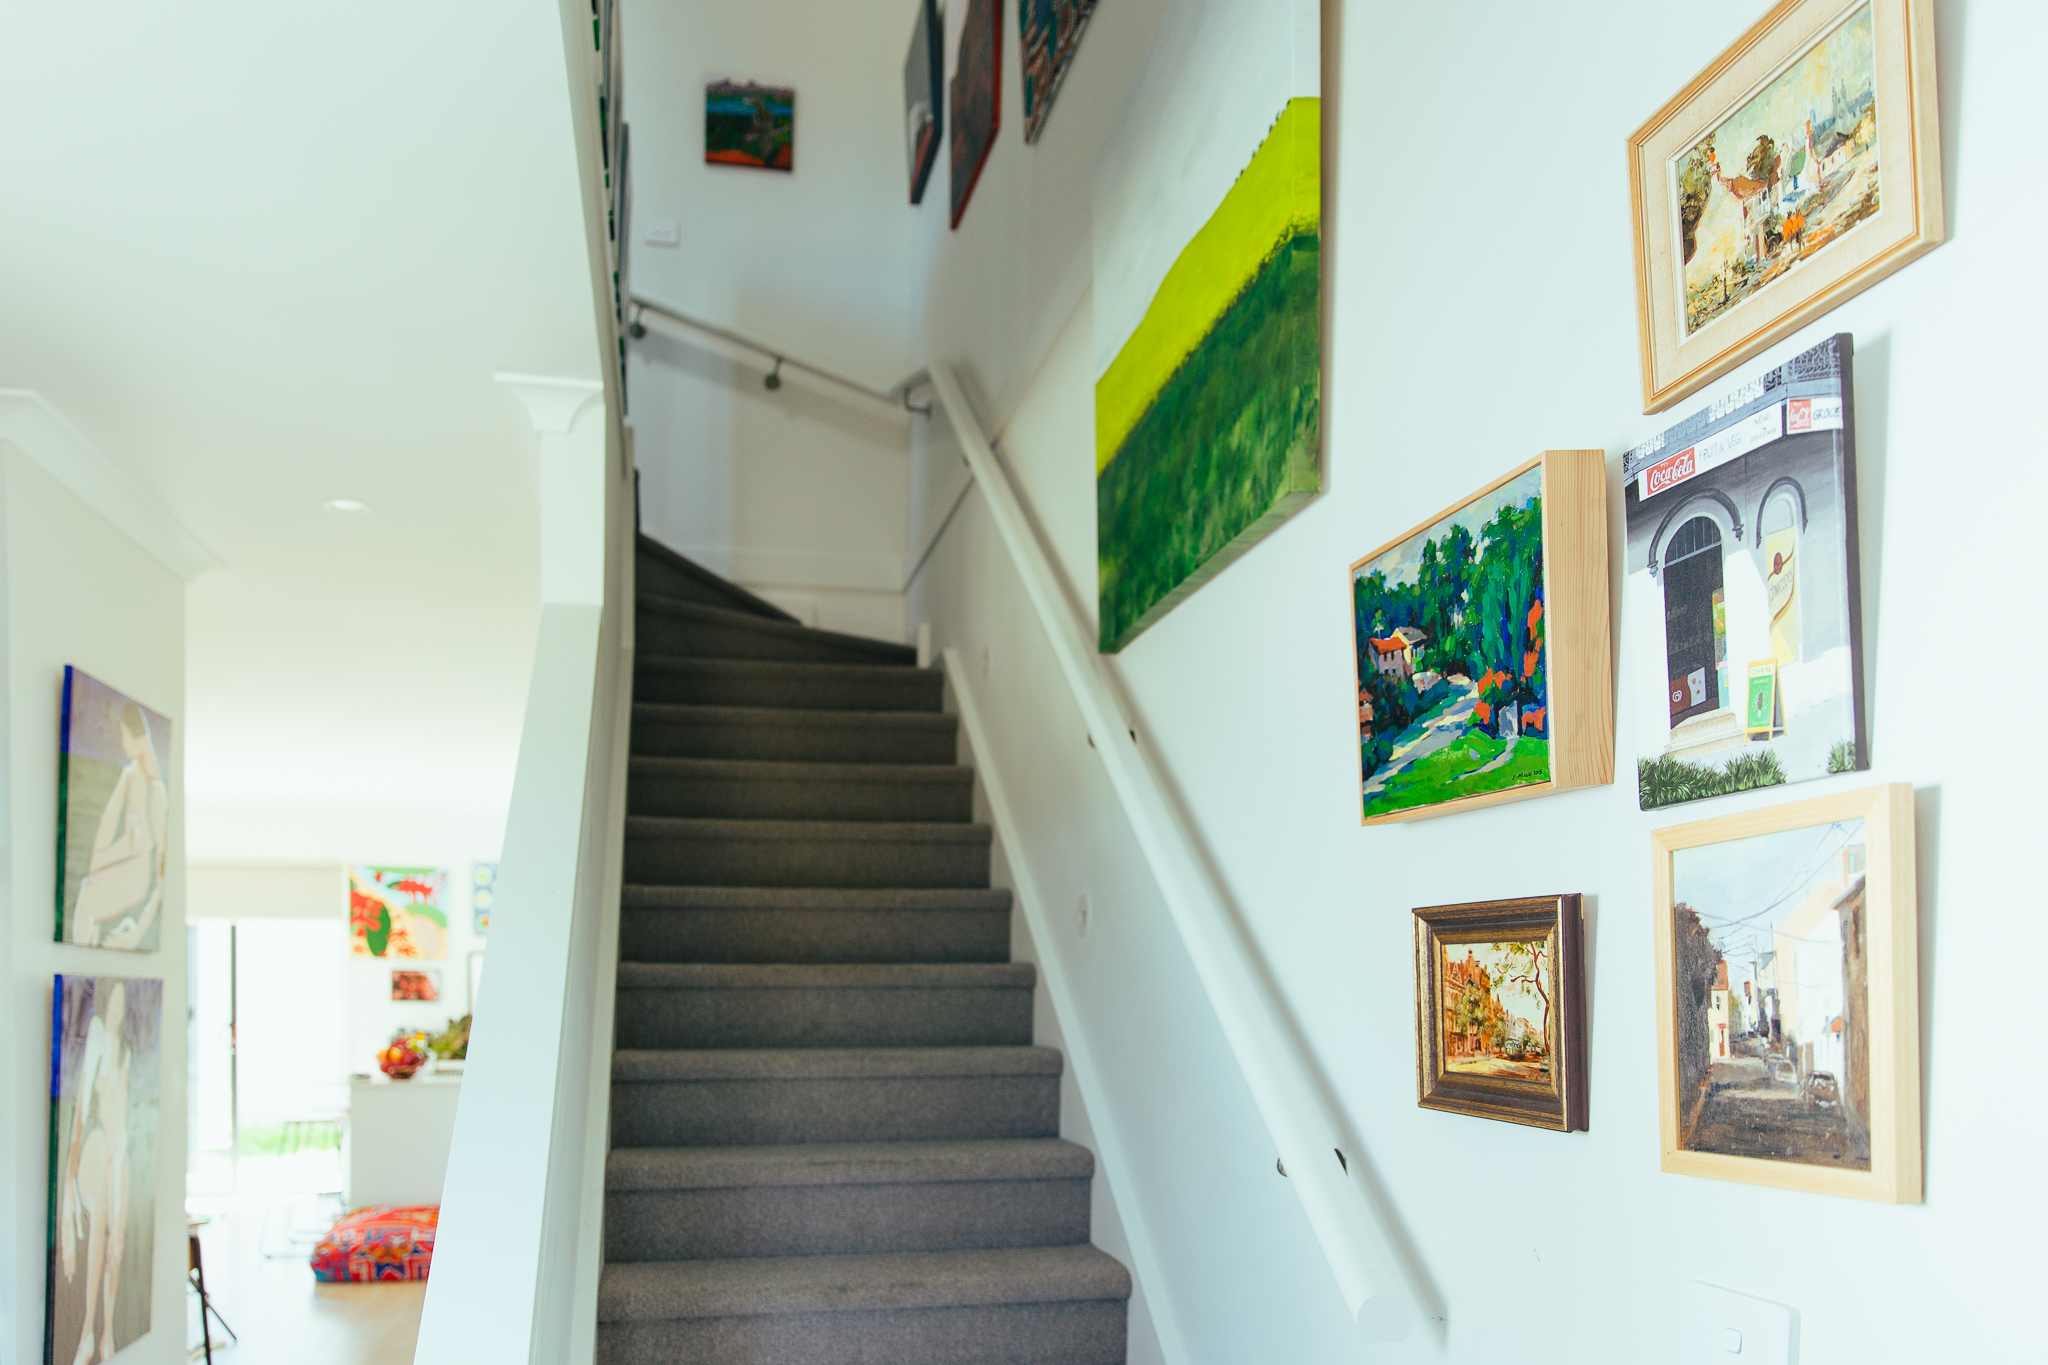 Hallway and staircase with multiple small artworks hung gallery style